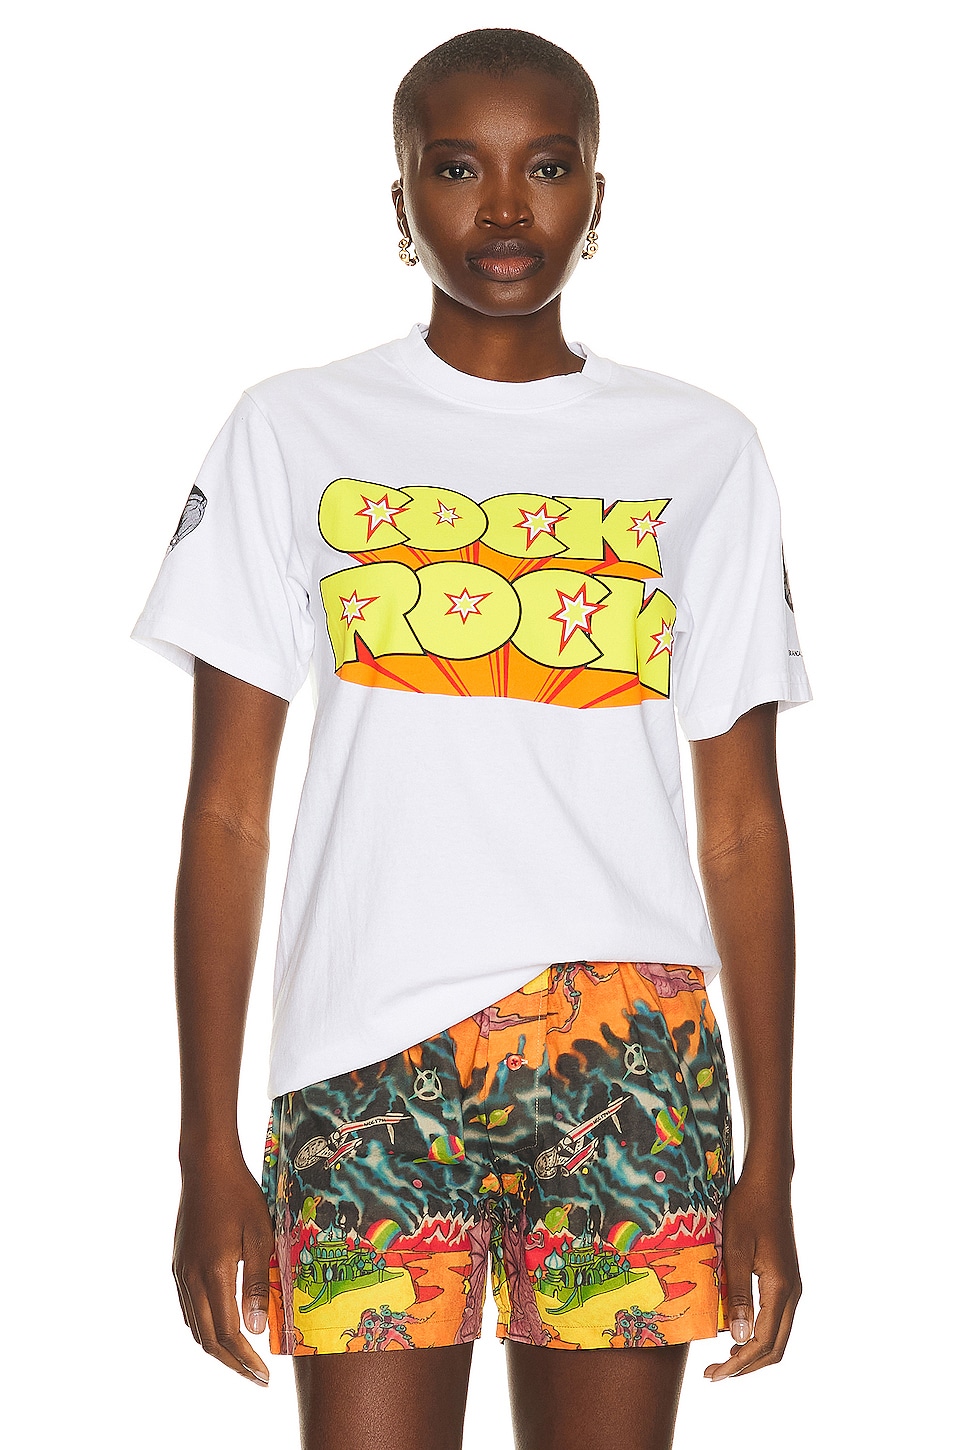 Glam Rock T-Shirt in White